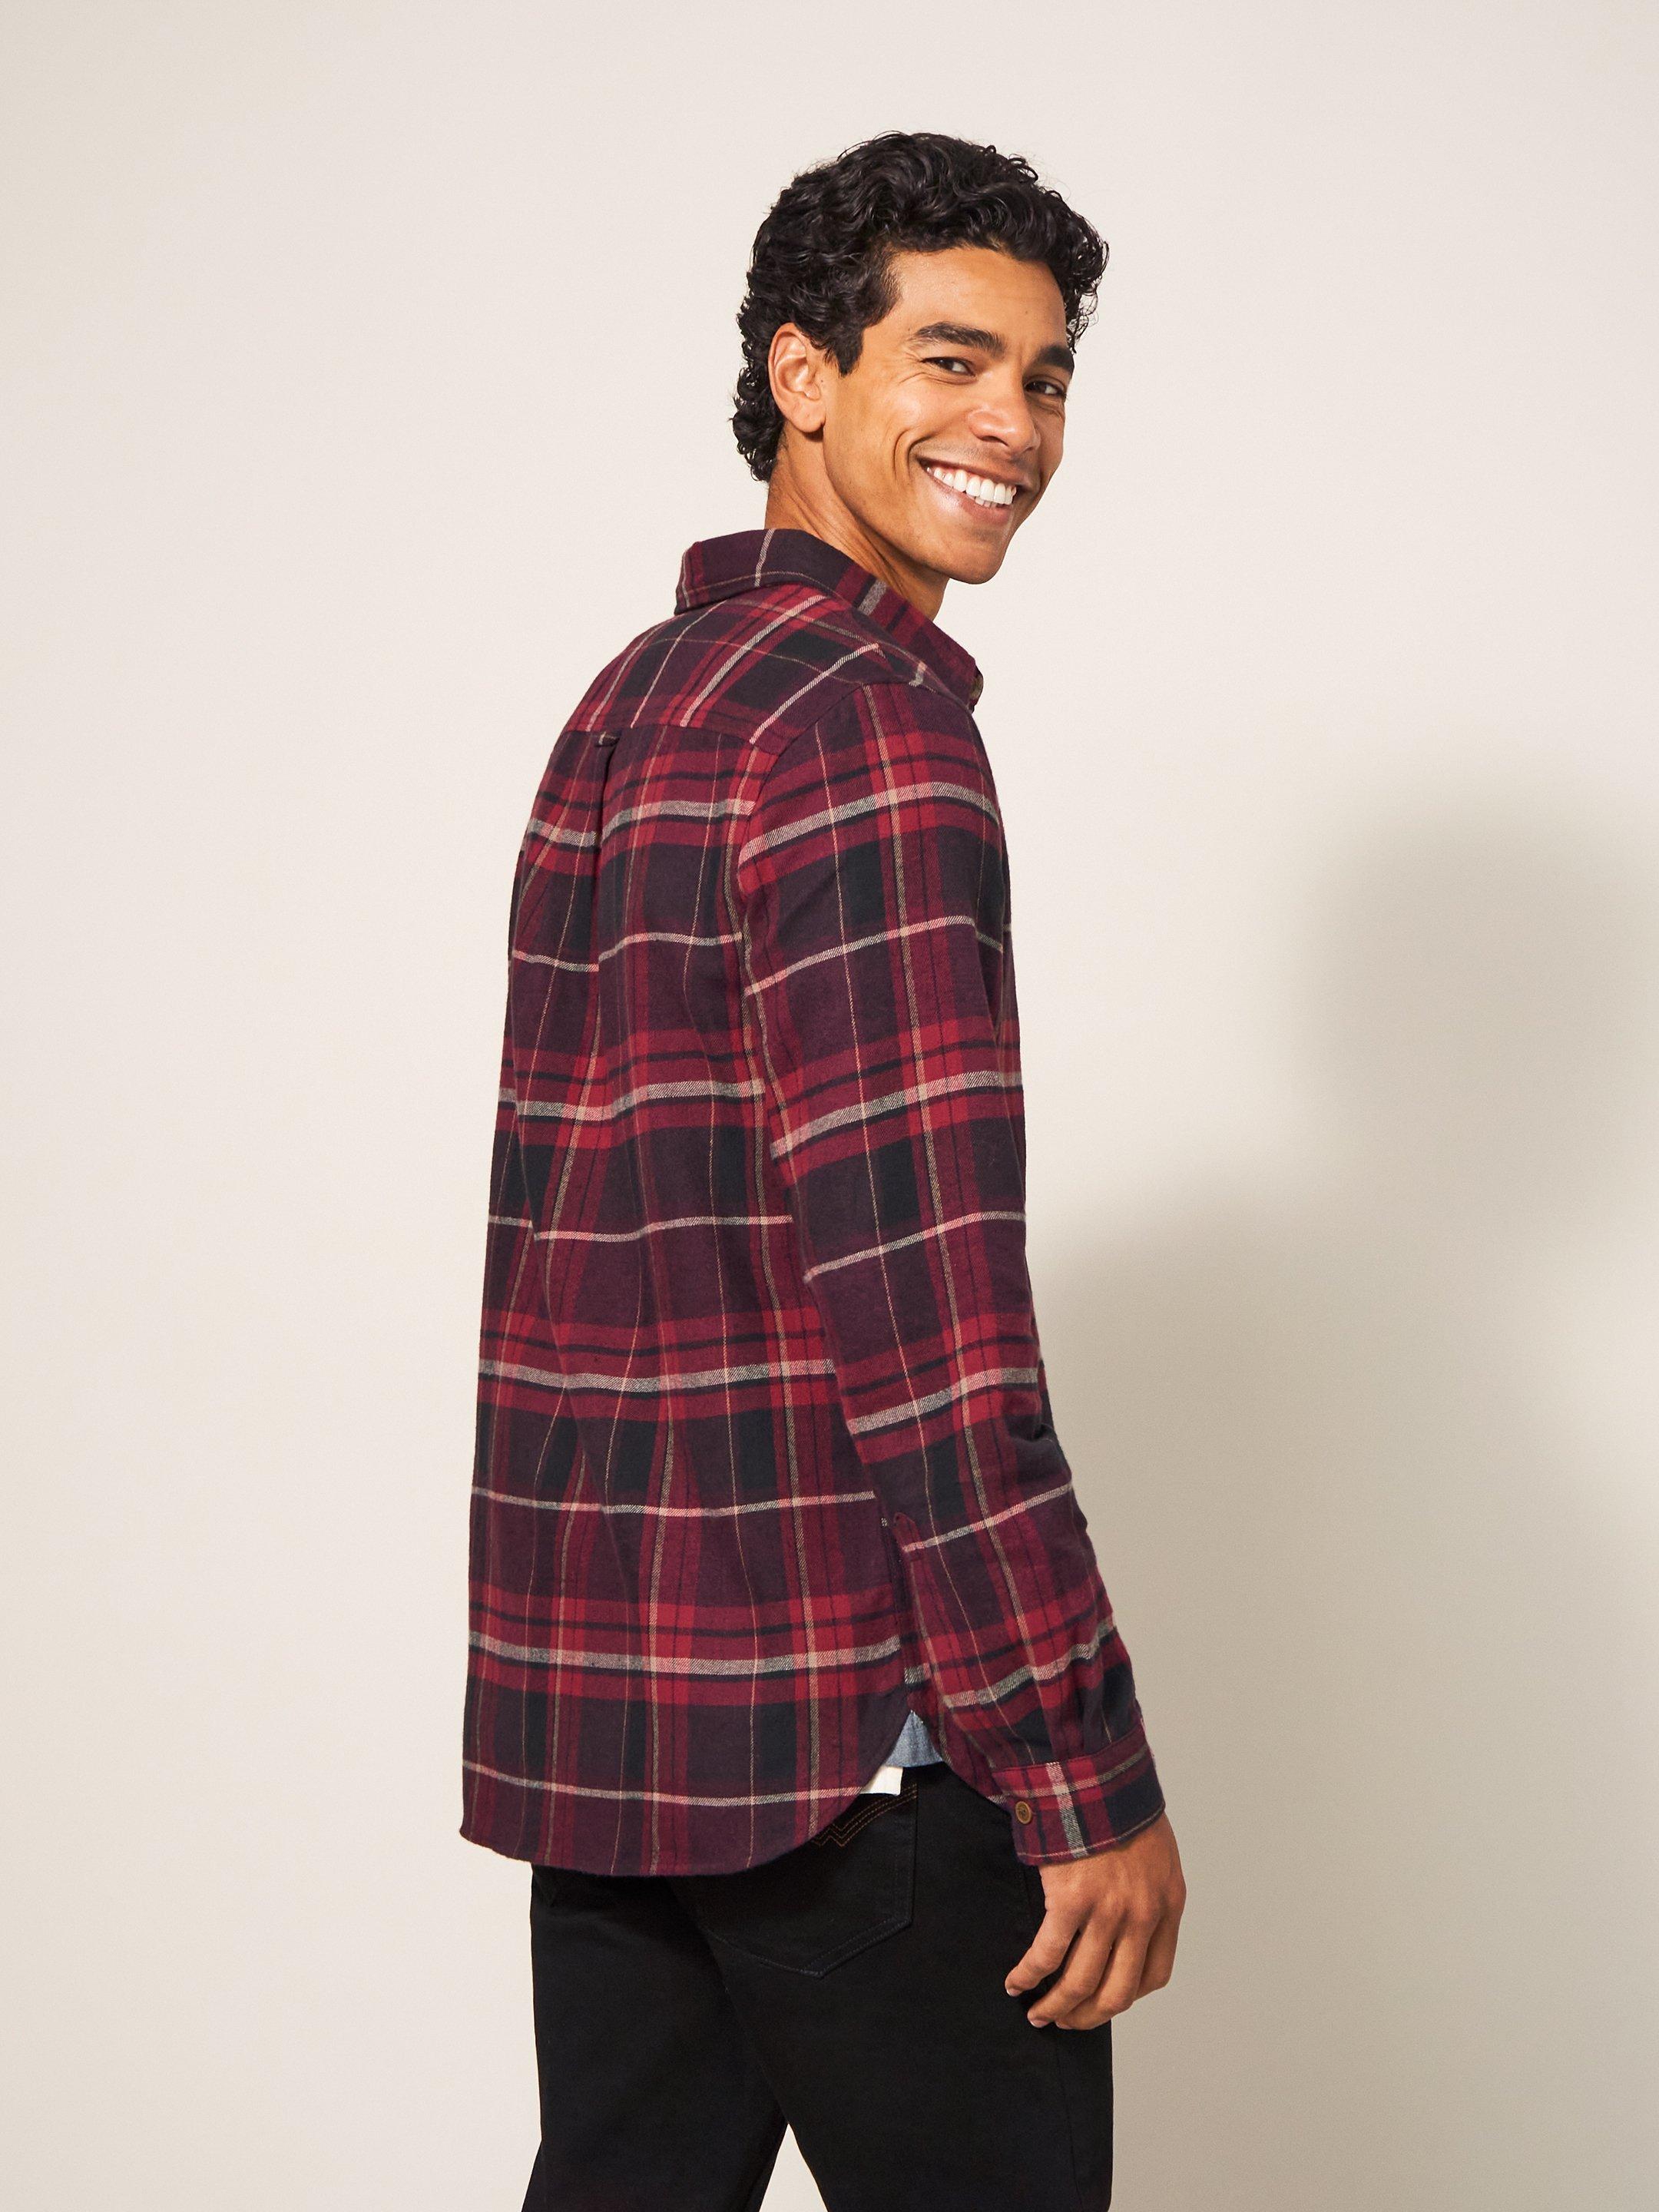 Moxley Brushed Check Shirt in DK RED - MODEL BACK